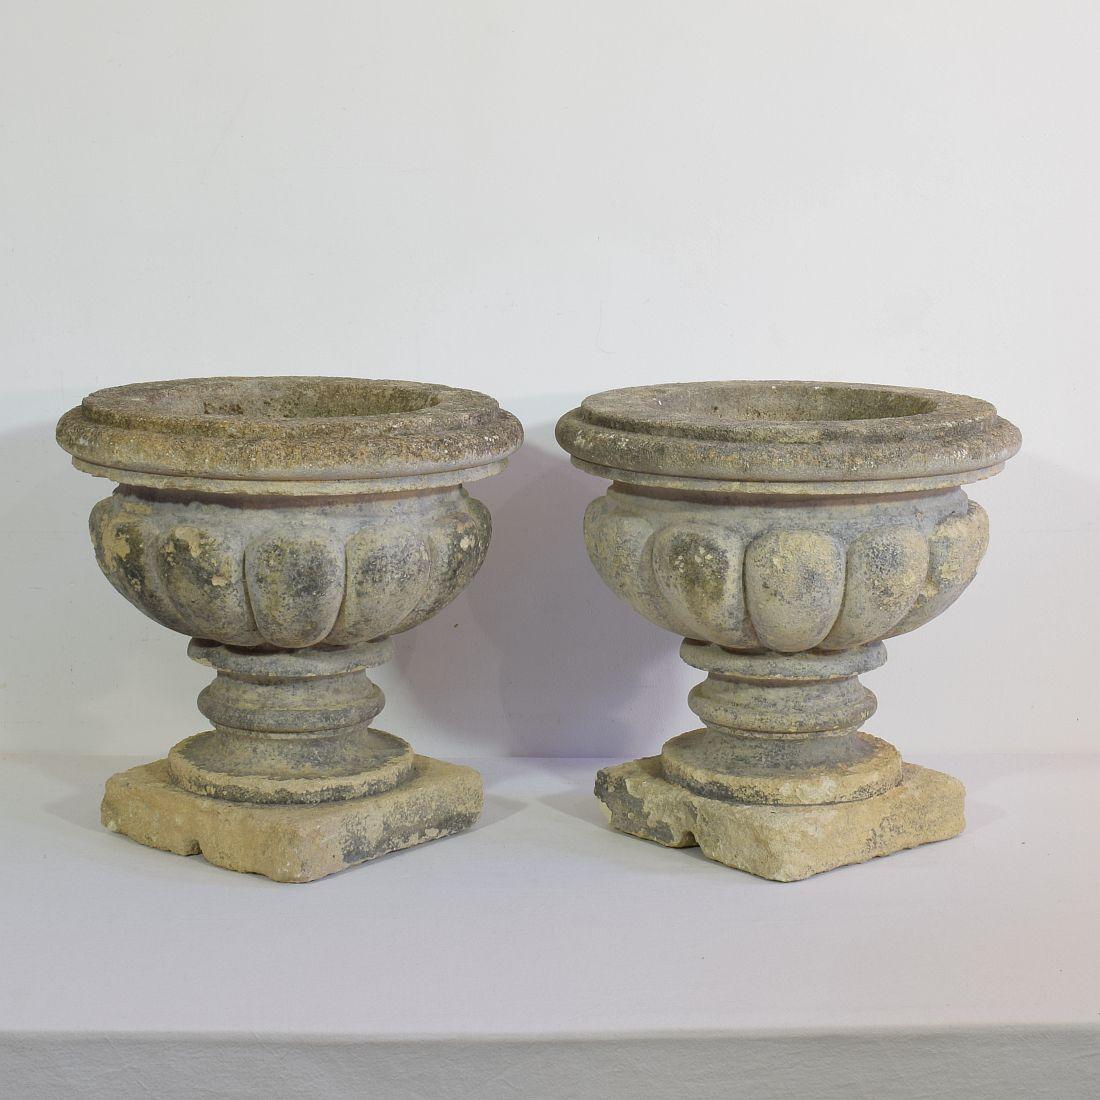 Beautiful pair weathered hand carved stone vases/planters with stunning patina and traces of color.
Hand carved stone planters having a nicely textured surface. They could be standing alone as decorative objects or could be used as planters.
These